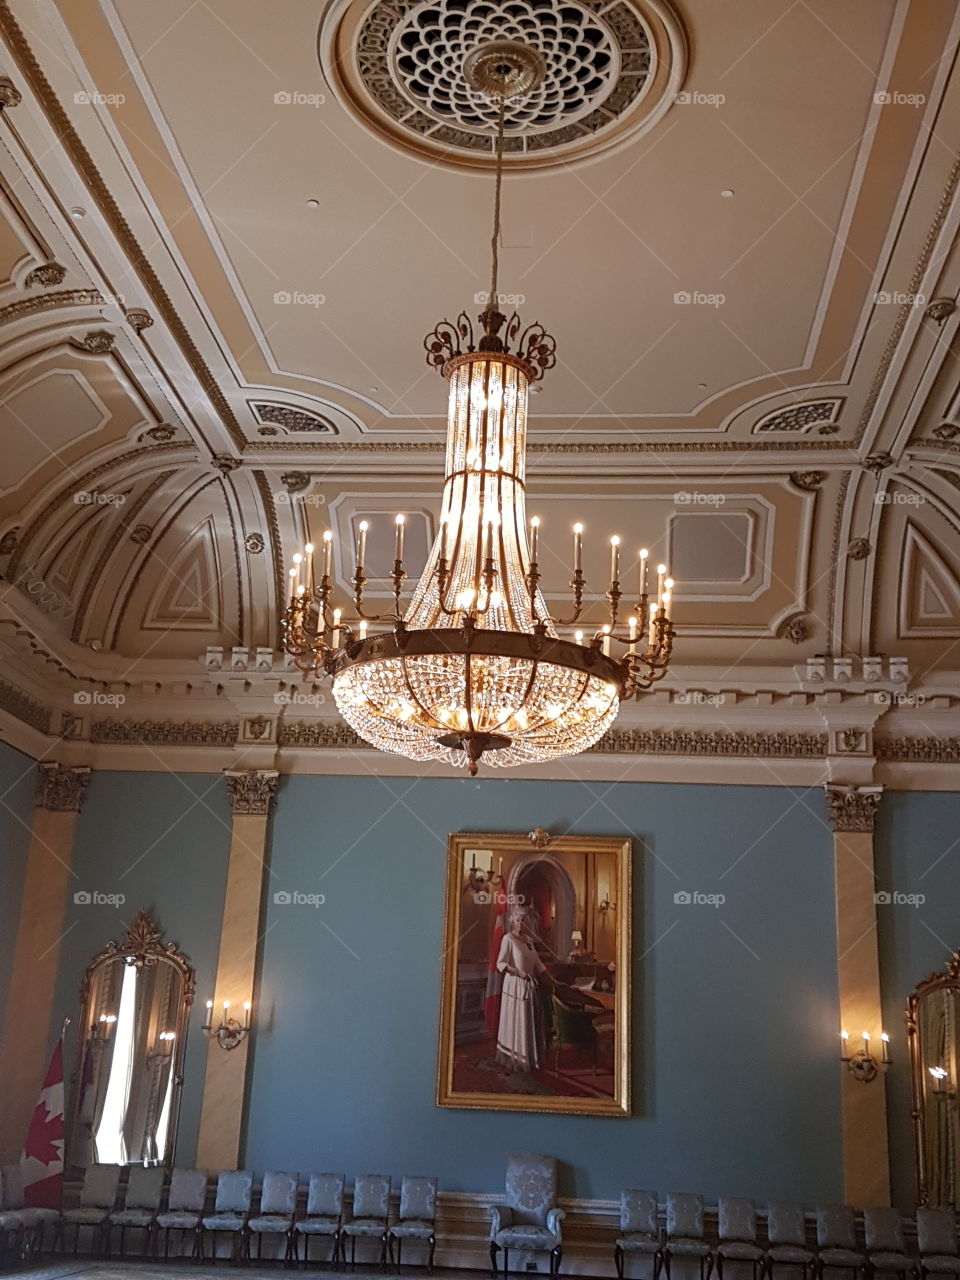 A great picture of the ballroom found in Rideau Hall Ottawa. Where the queen actually went!